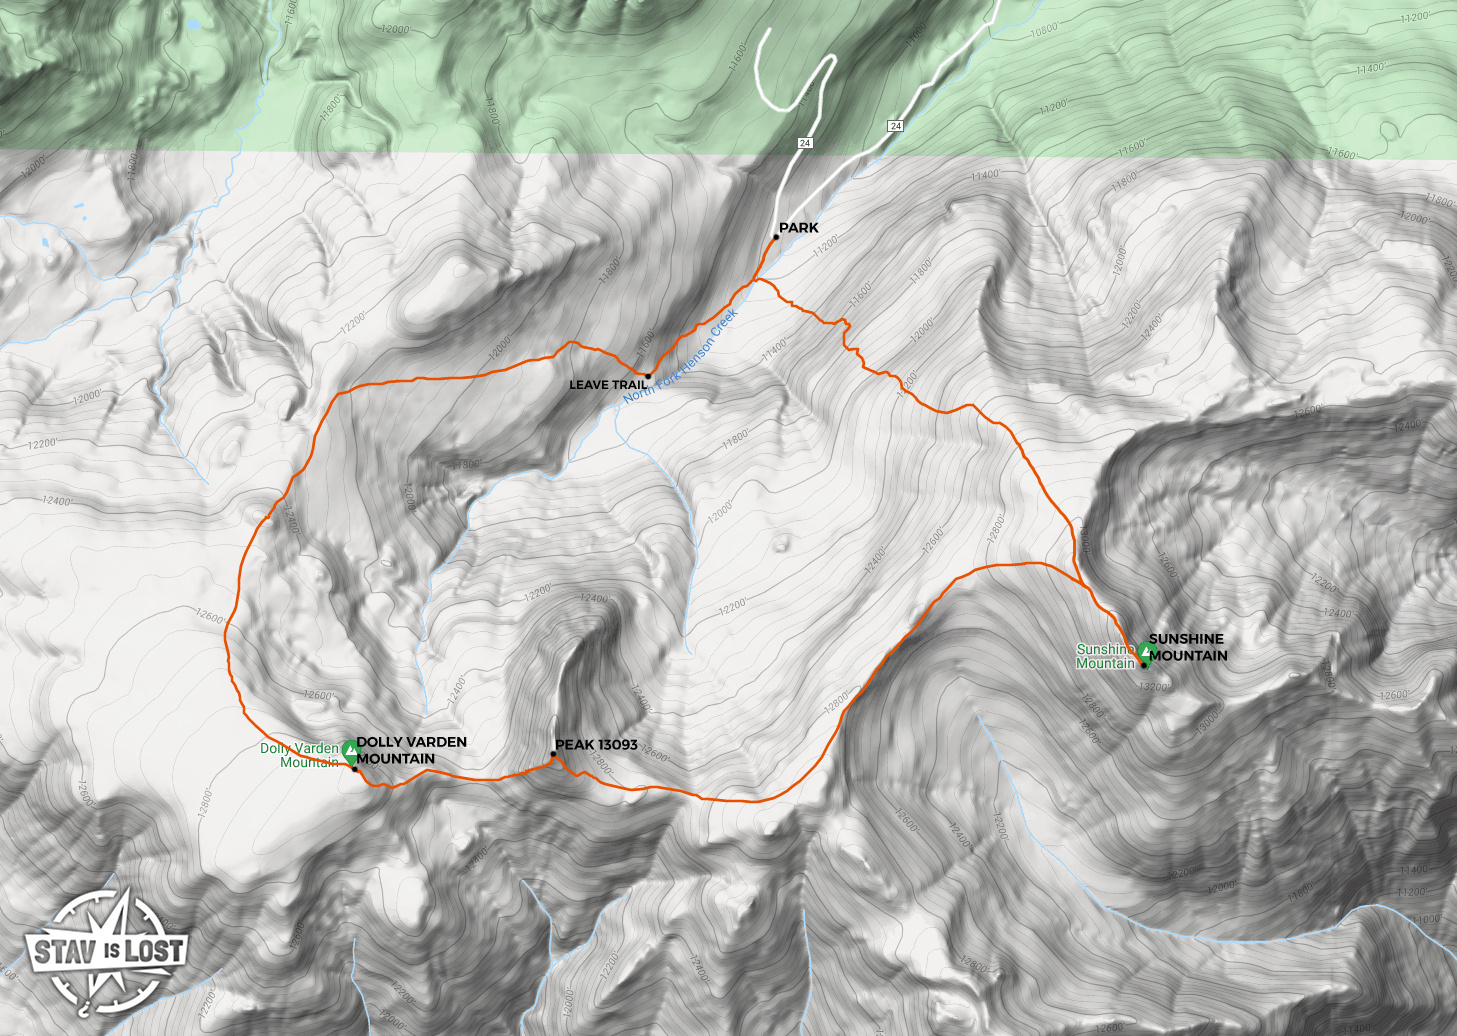 map for Dolly Varden Mountain, Peak 13093, and Sunshine Mountain by stav is lost